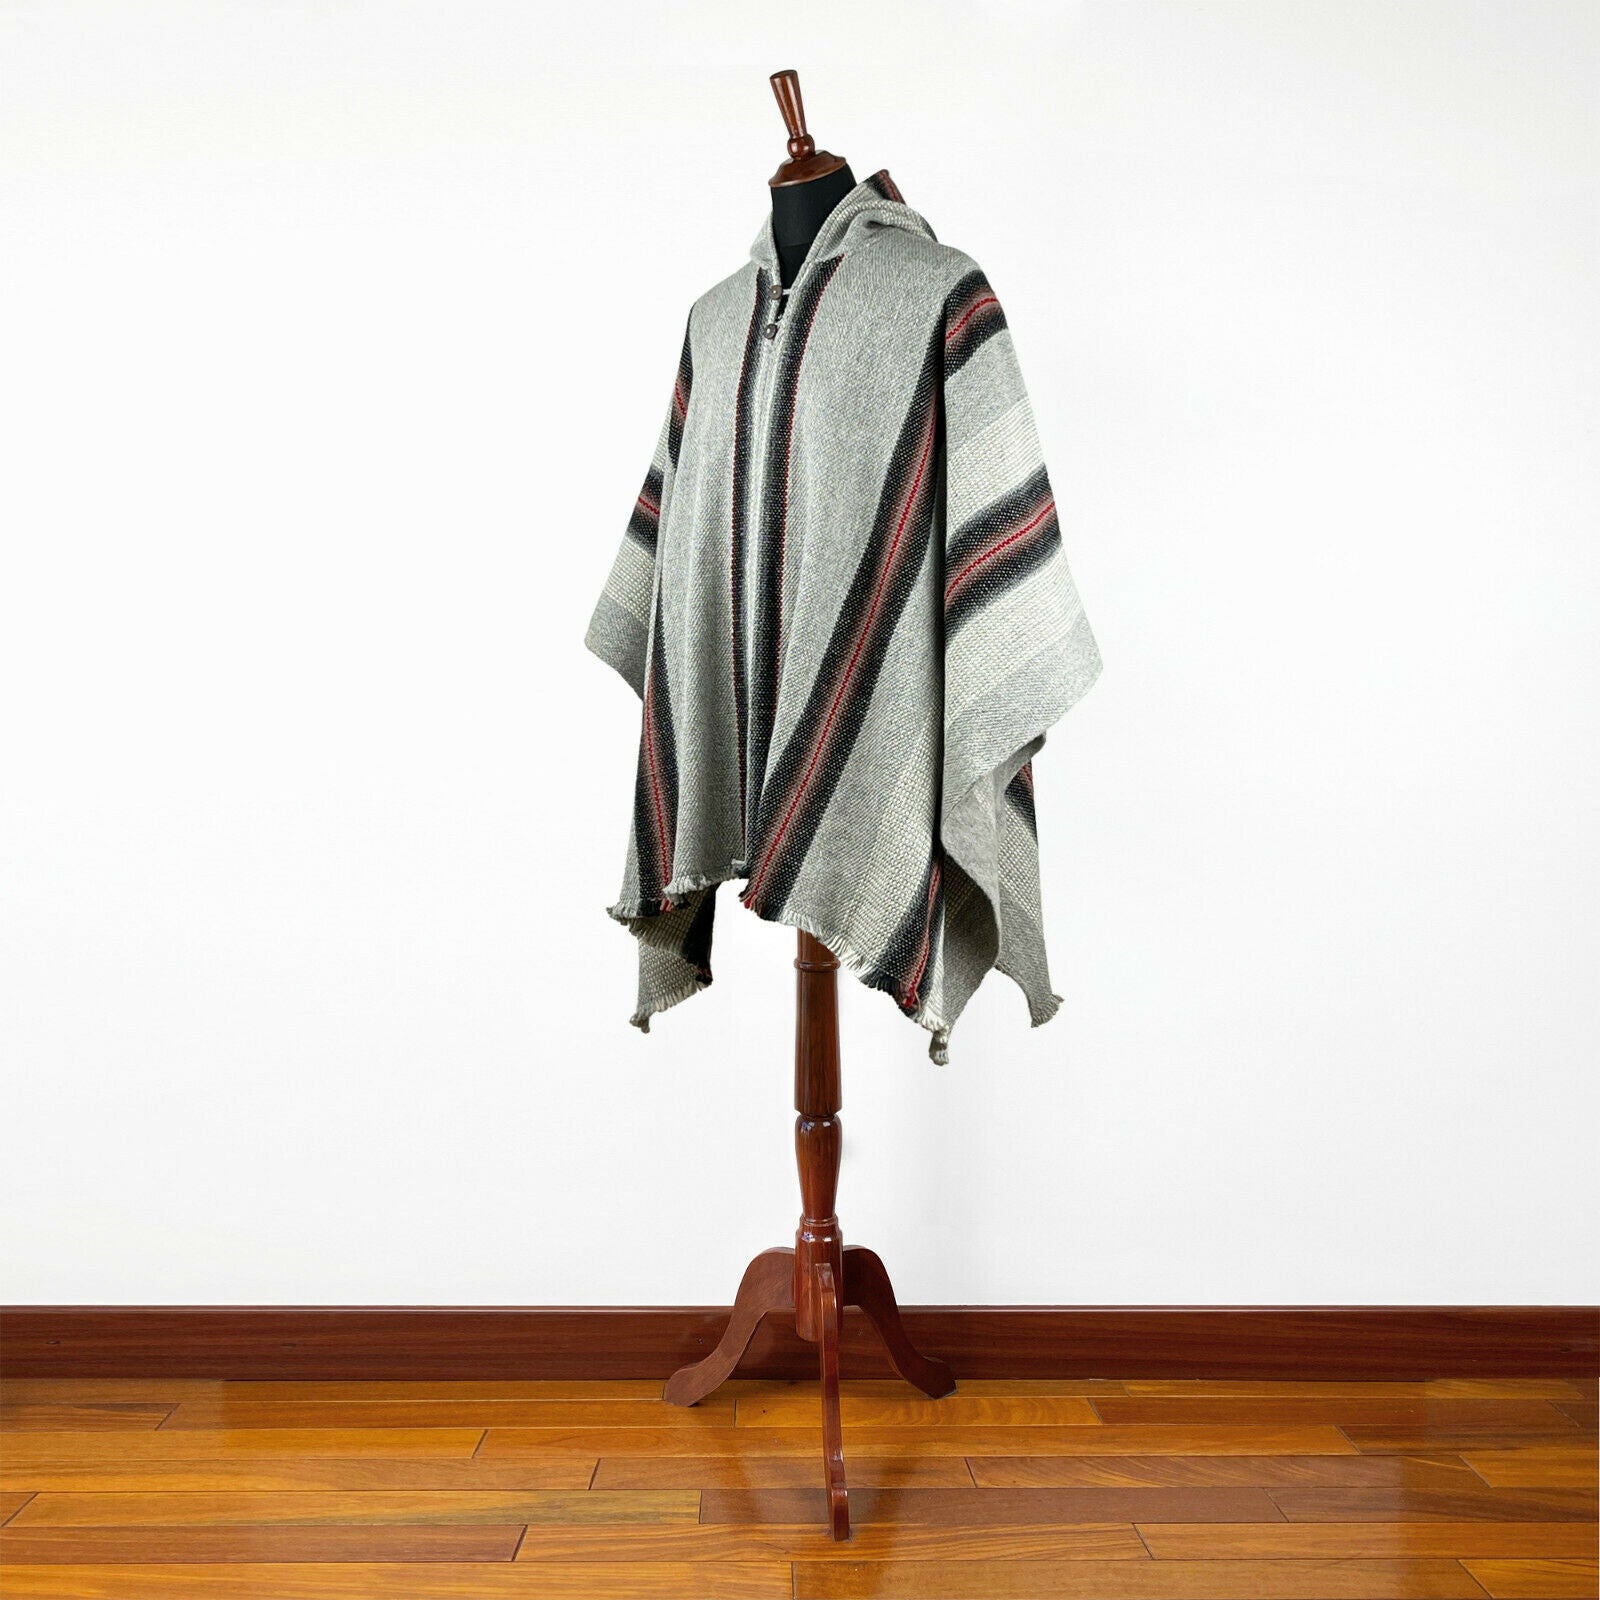 Congüime - Llama Wool Unisex South American Handwoven Thick Hooded Poncho - striped - gray